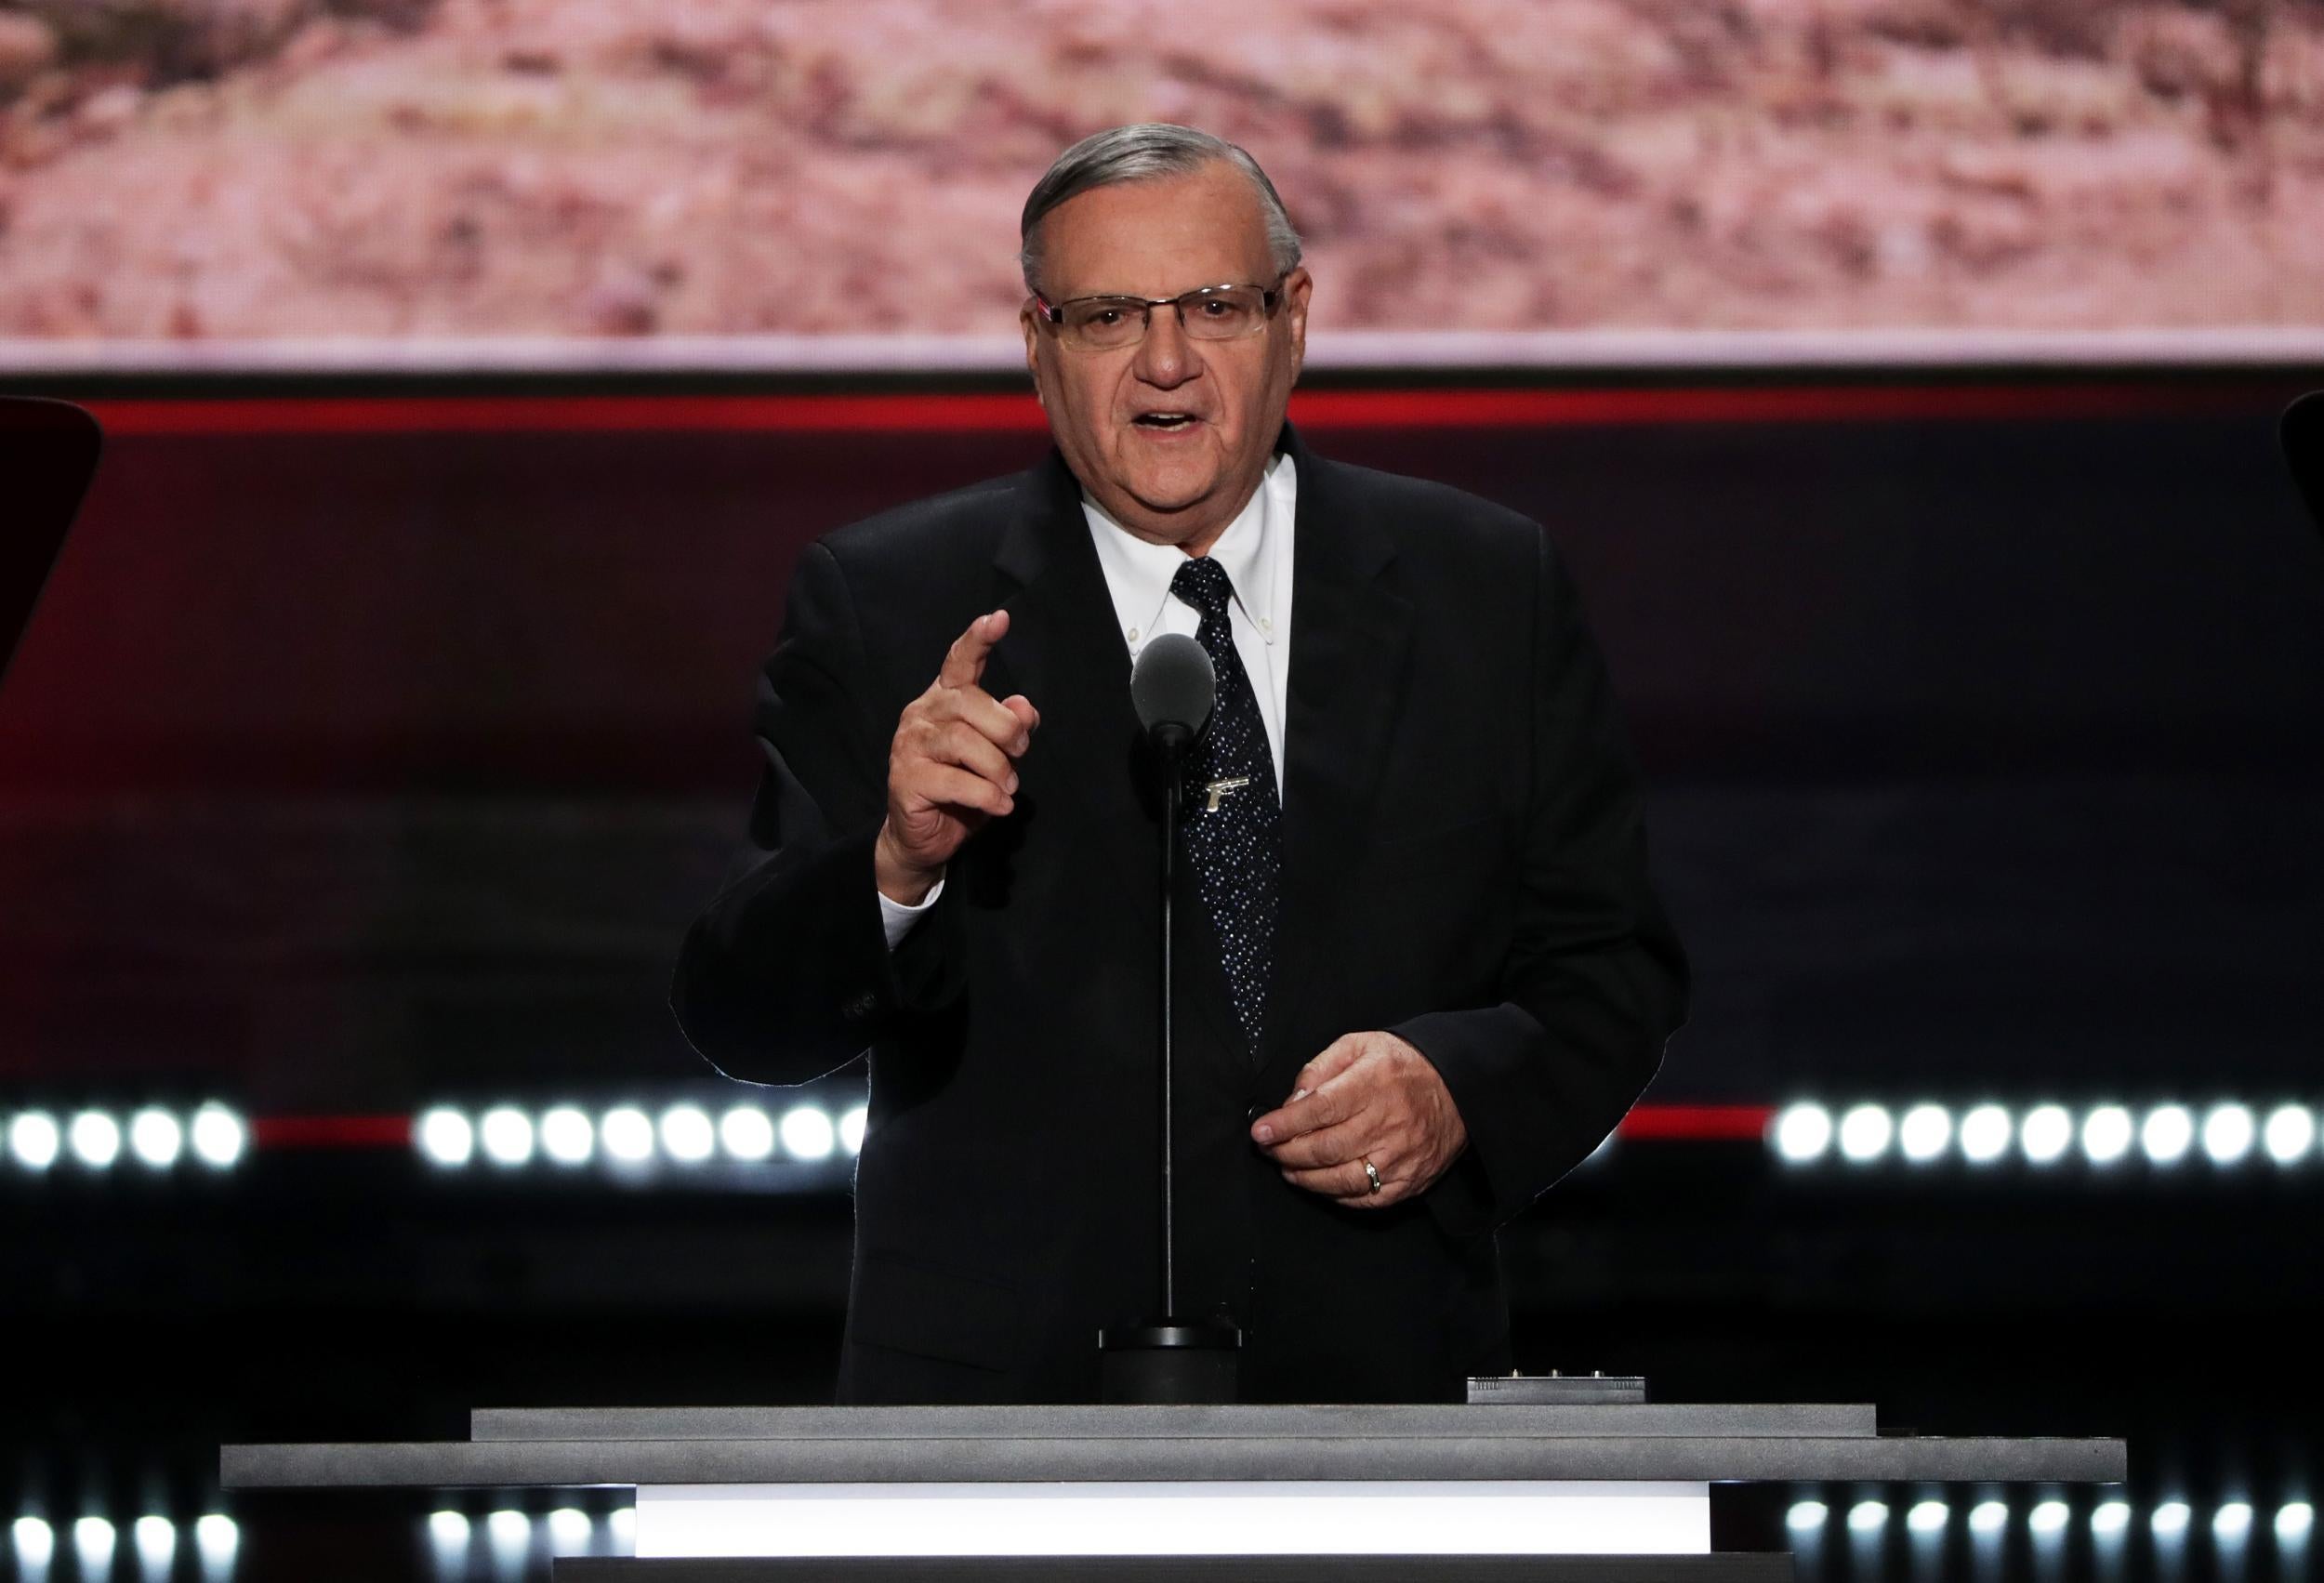 Maricopa County Sheriff Joe Arpaio gestures to the crowd as he delivers a speech on the fourth day of the Republican National Convention